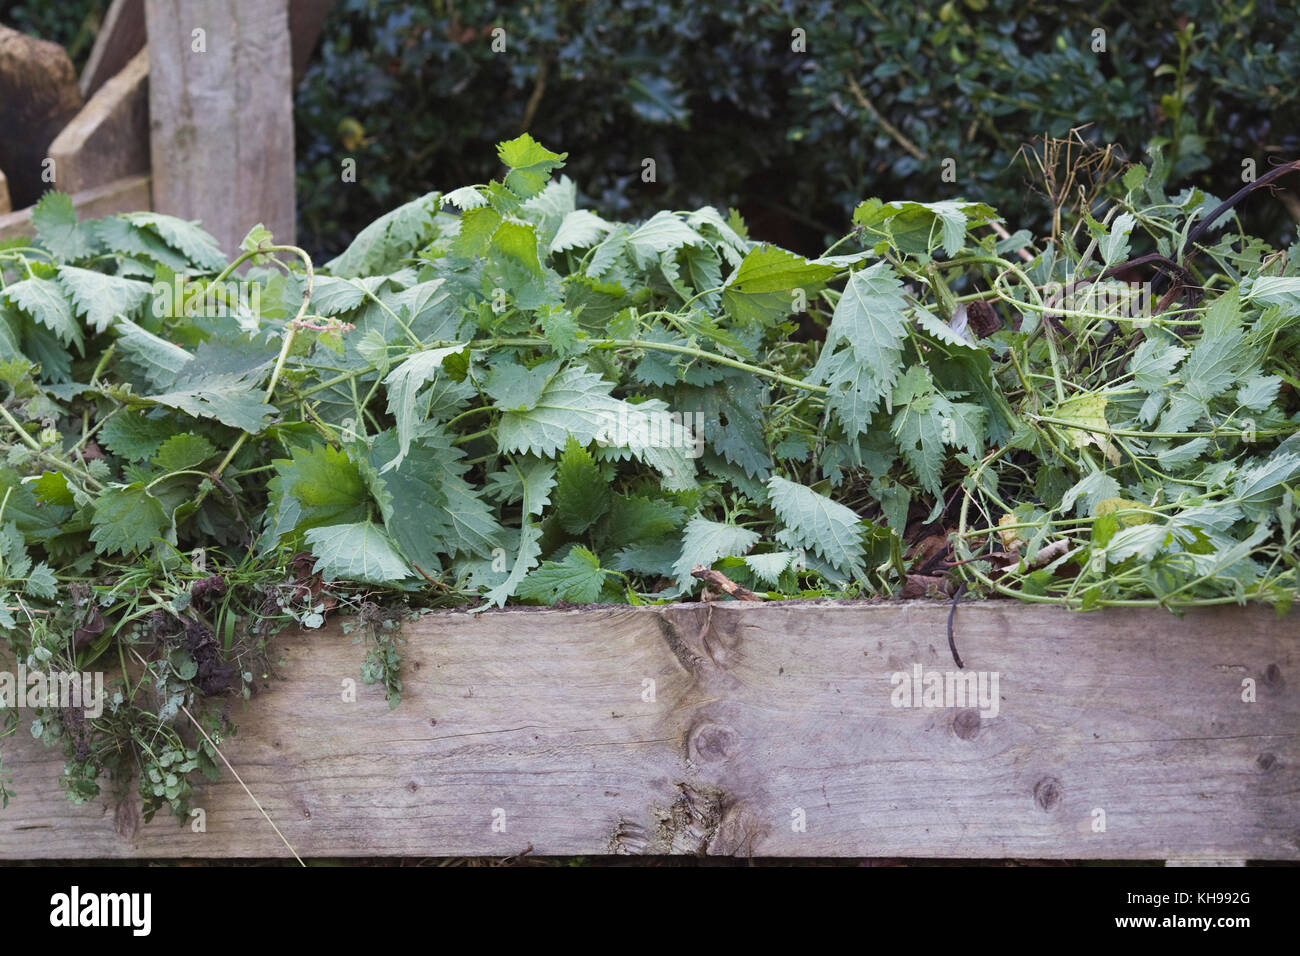 Urtica dioica. Nettles on the compost heap. Stock Photo